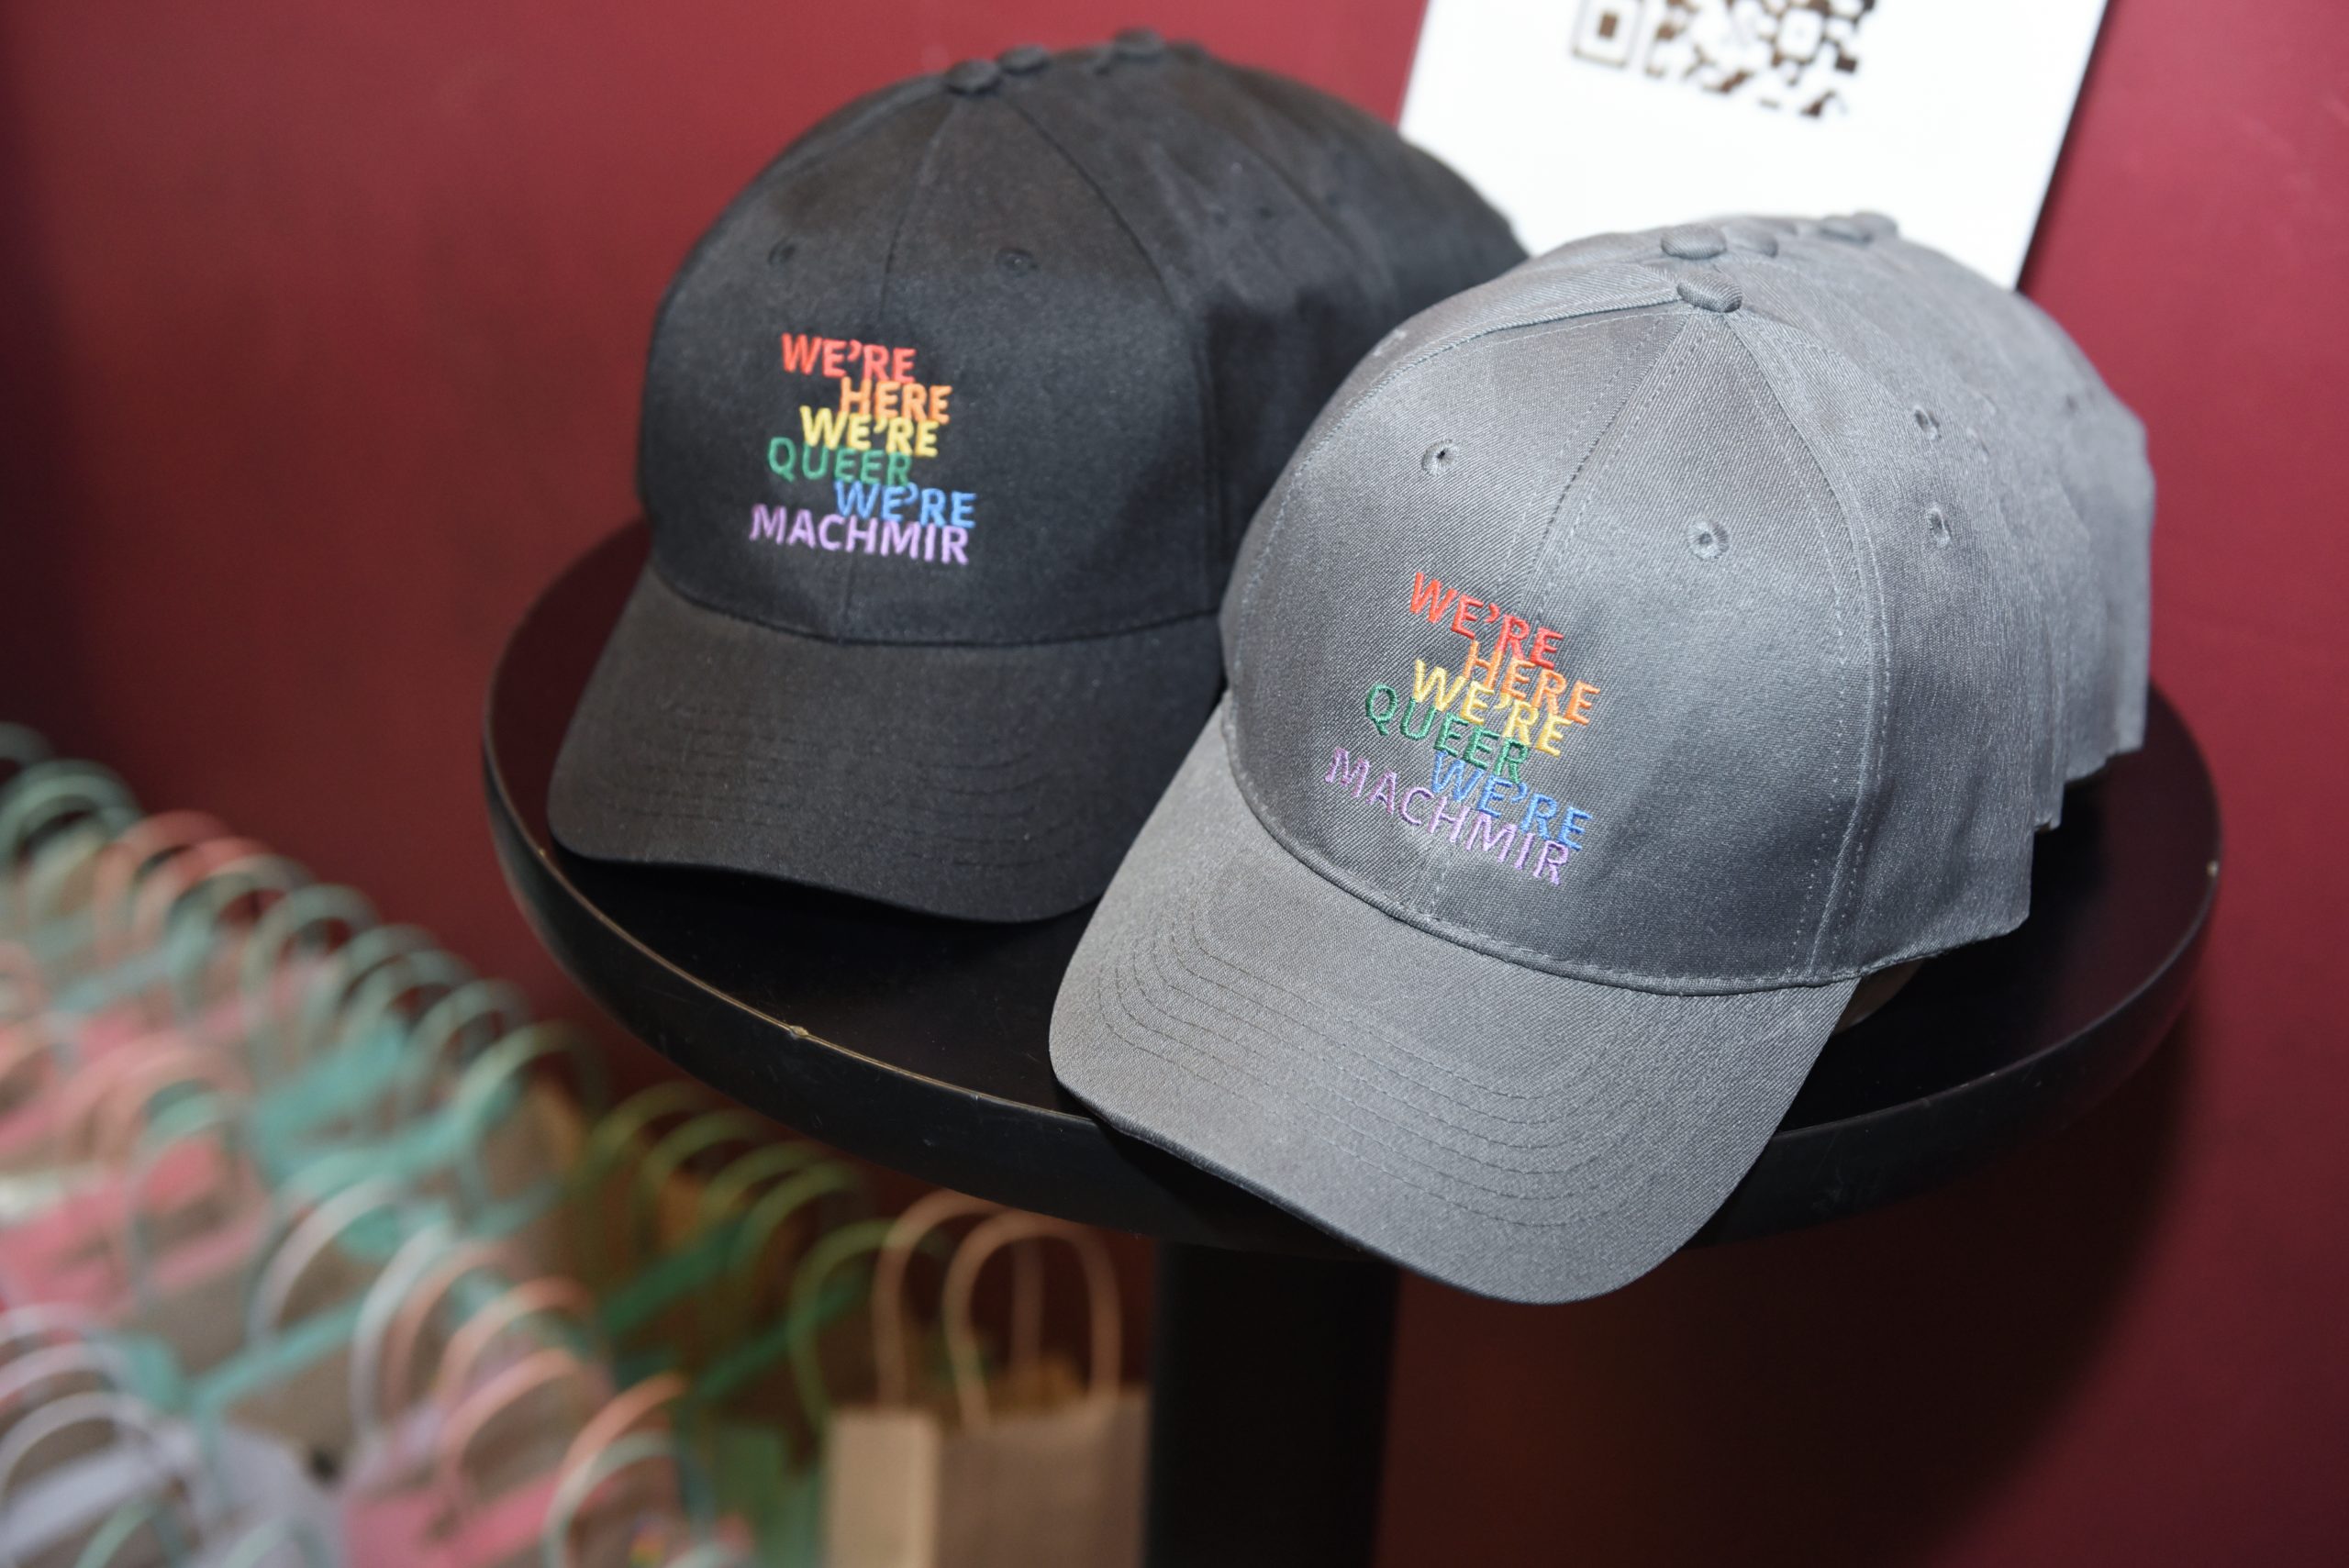 Black and Gray Baseball caps with "We're Here, We're Queer, We're Machmir" embroidered on them in rainbow letters